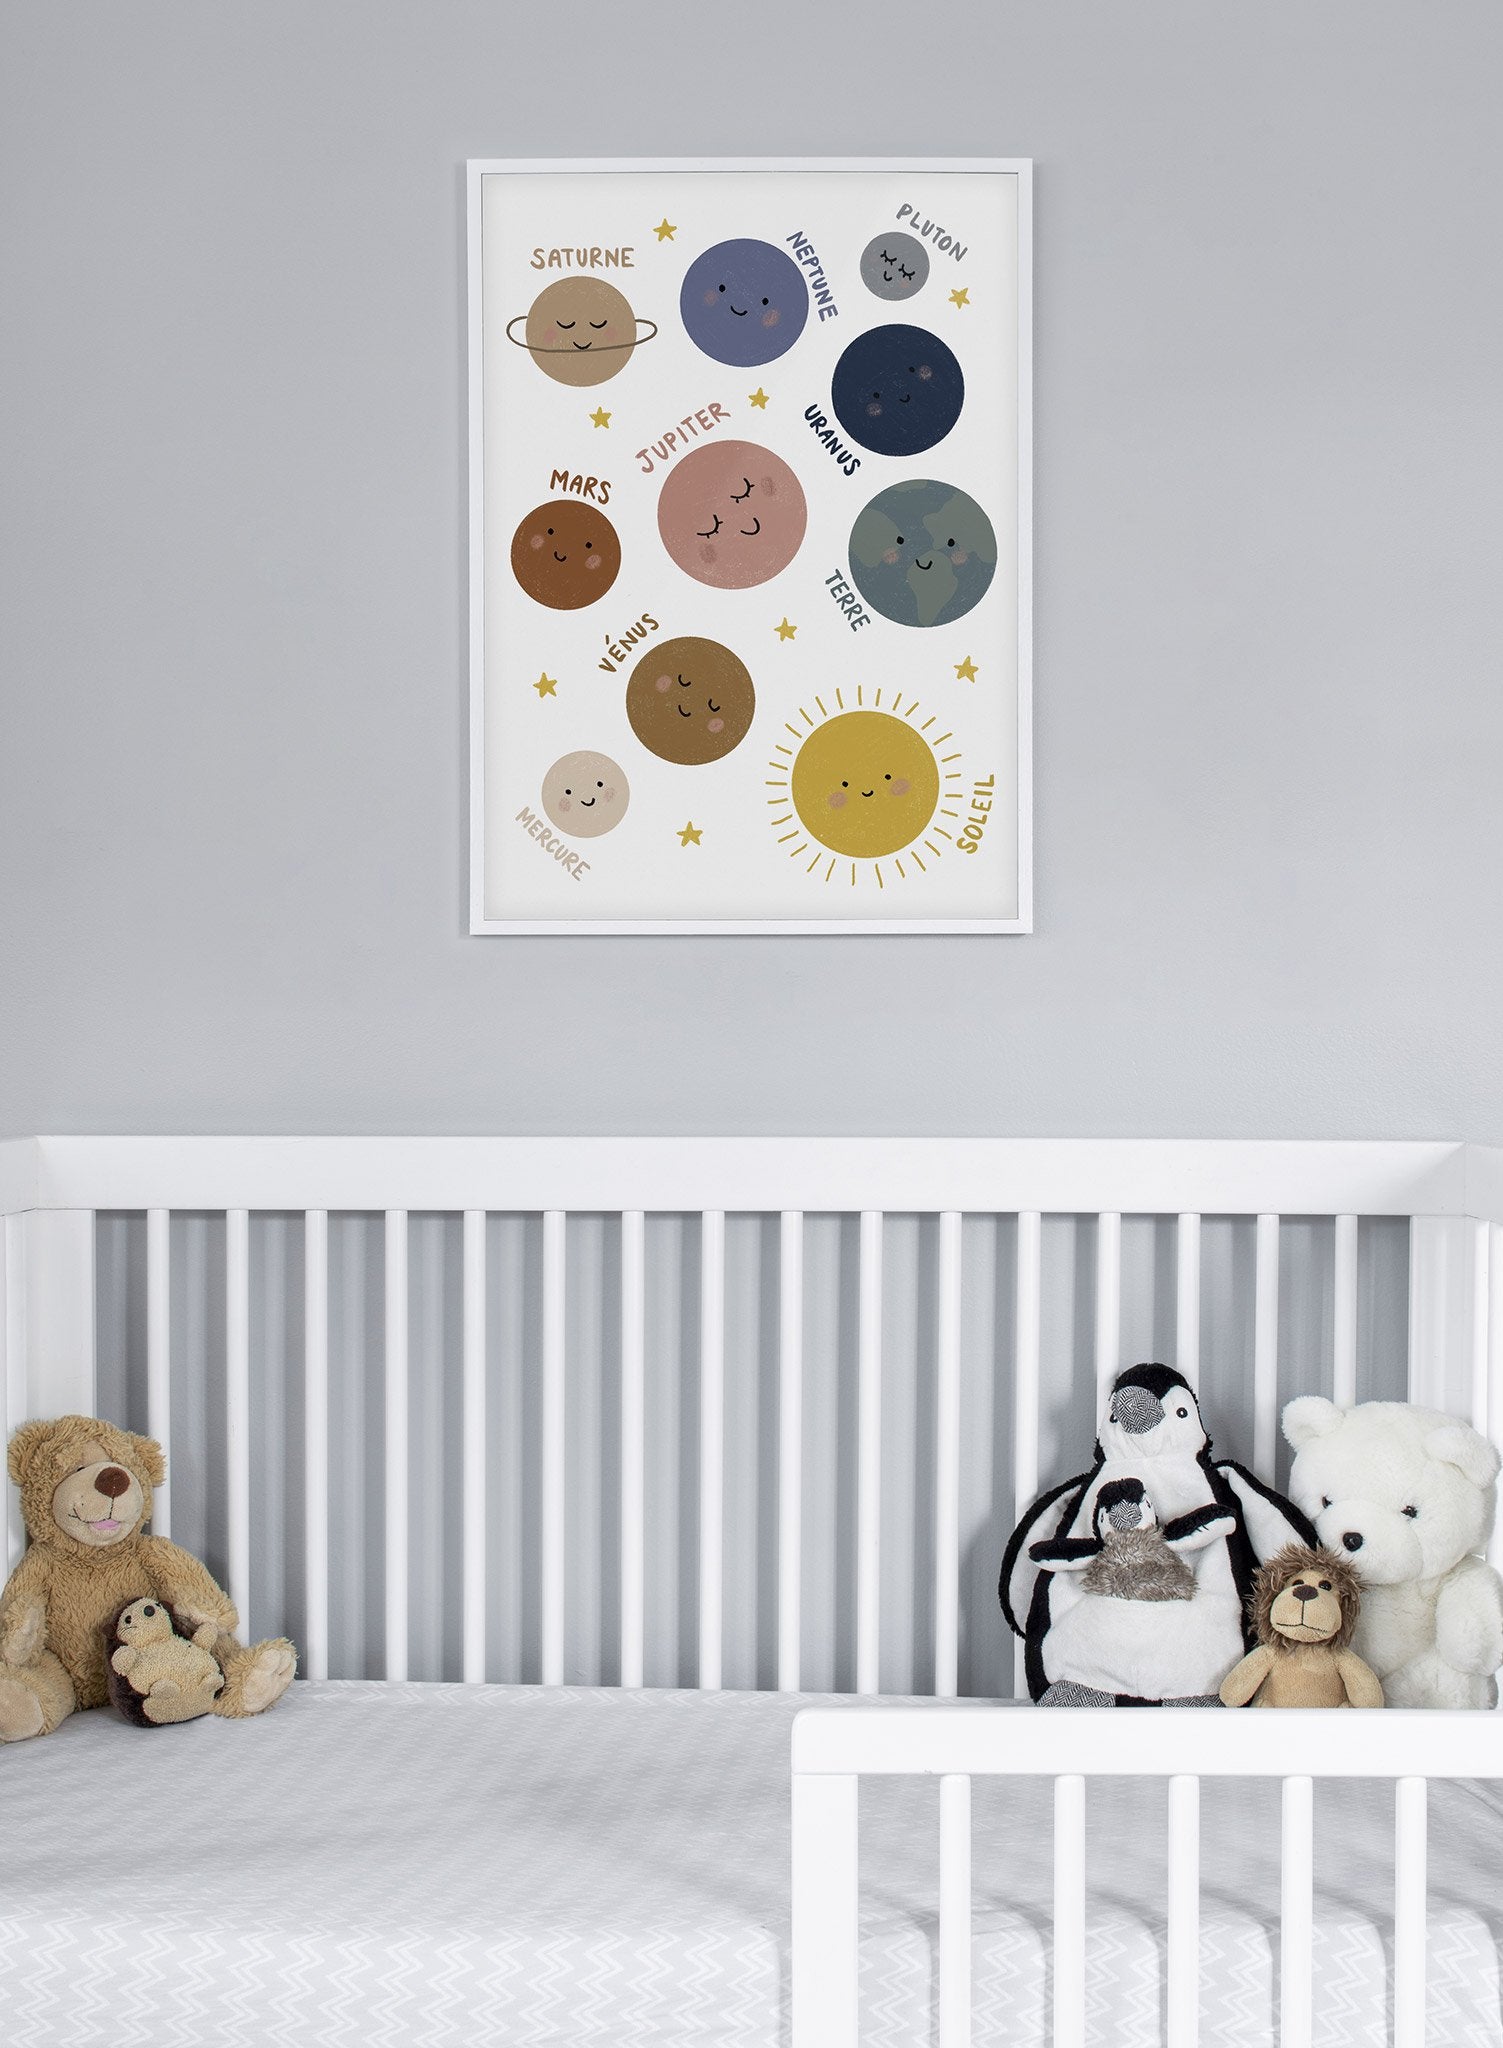 Kids nursery poster by Opposite Wall with solar system planets in French - Lifestyle - Kids Nursery